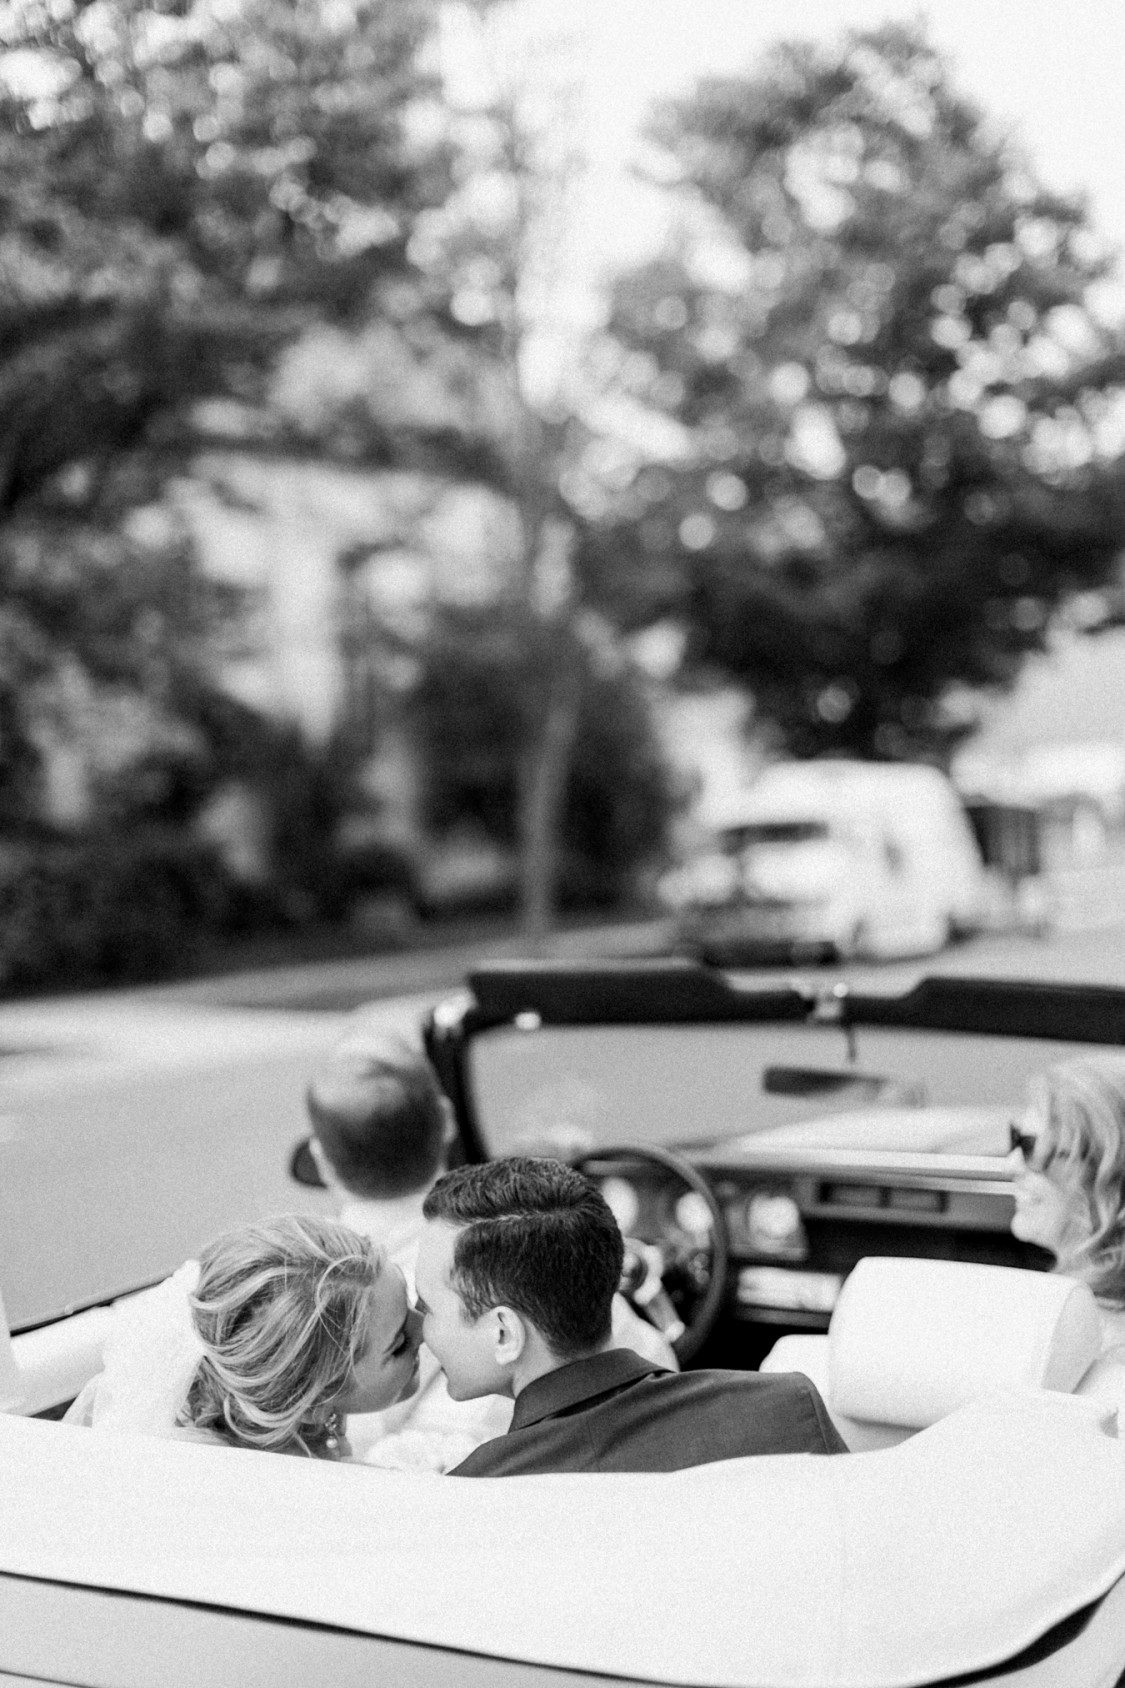 A bride and groom kiss in a classic Classic Car as shot by Petoskey wedding photographer